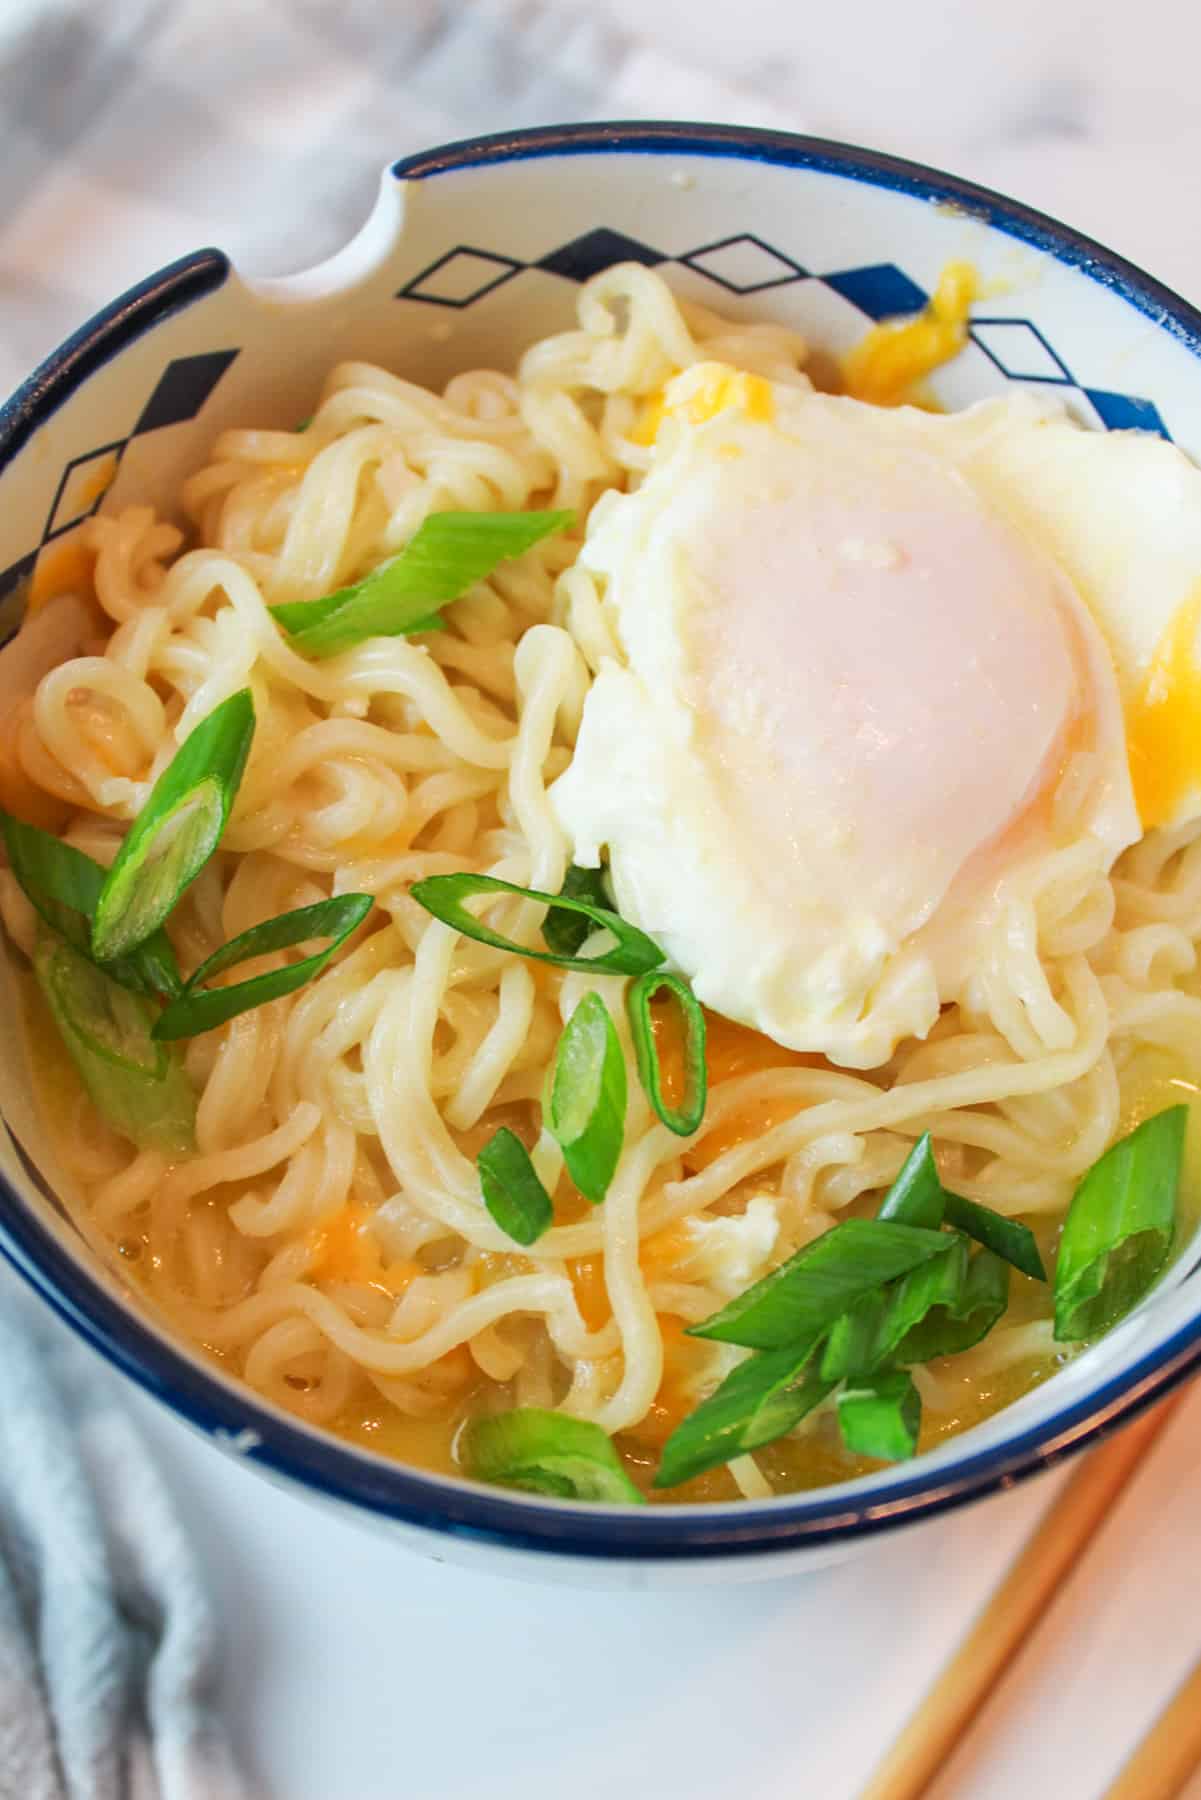 aerial view of a bowl filled with cheesy ramen, a poached egg, and sliced green onion